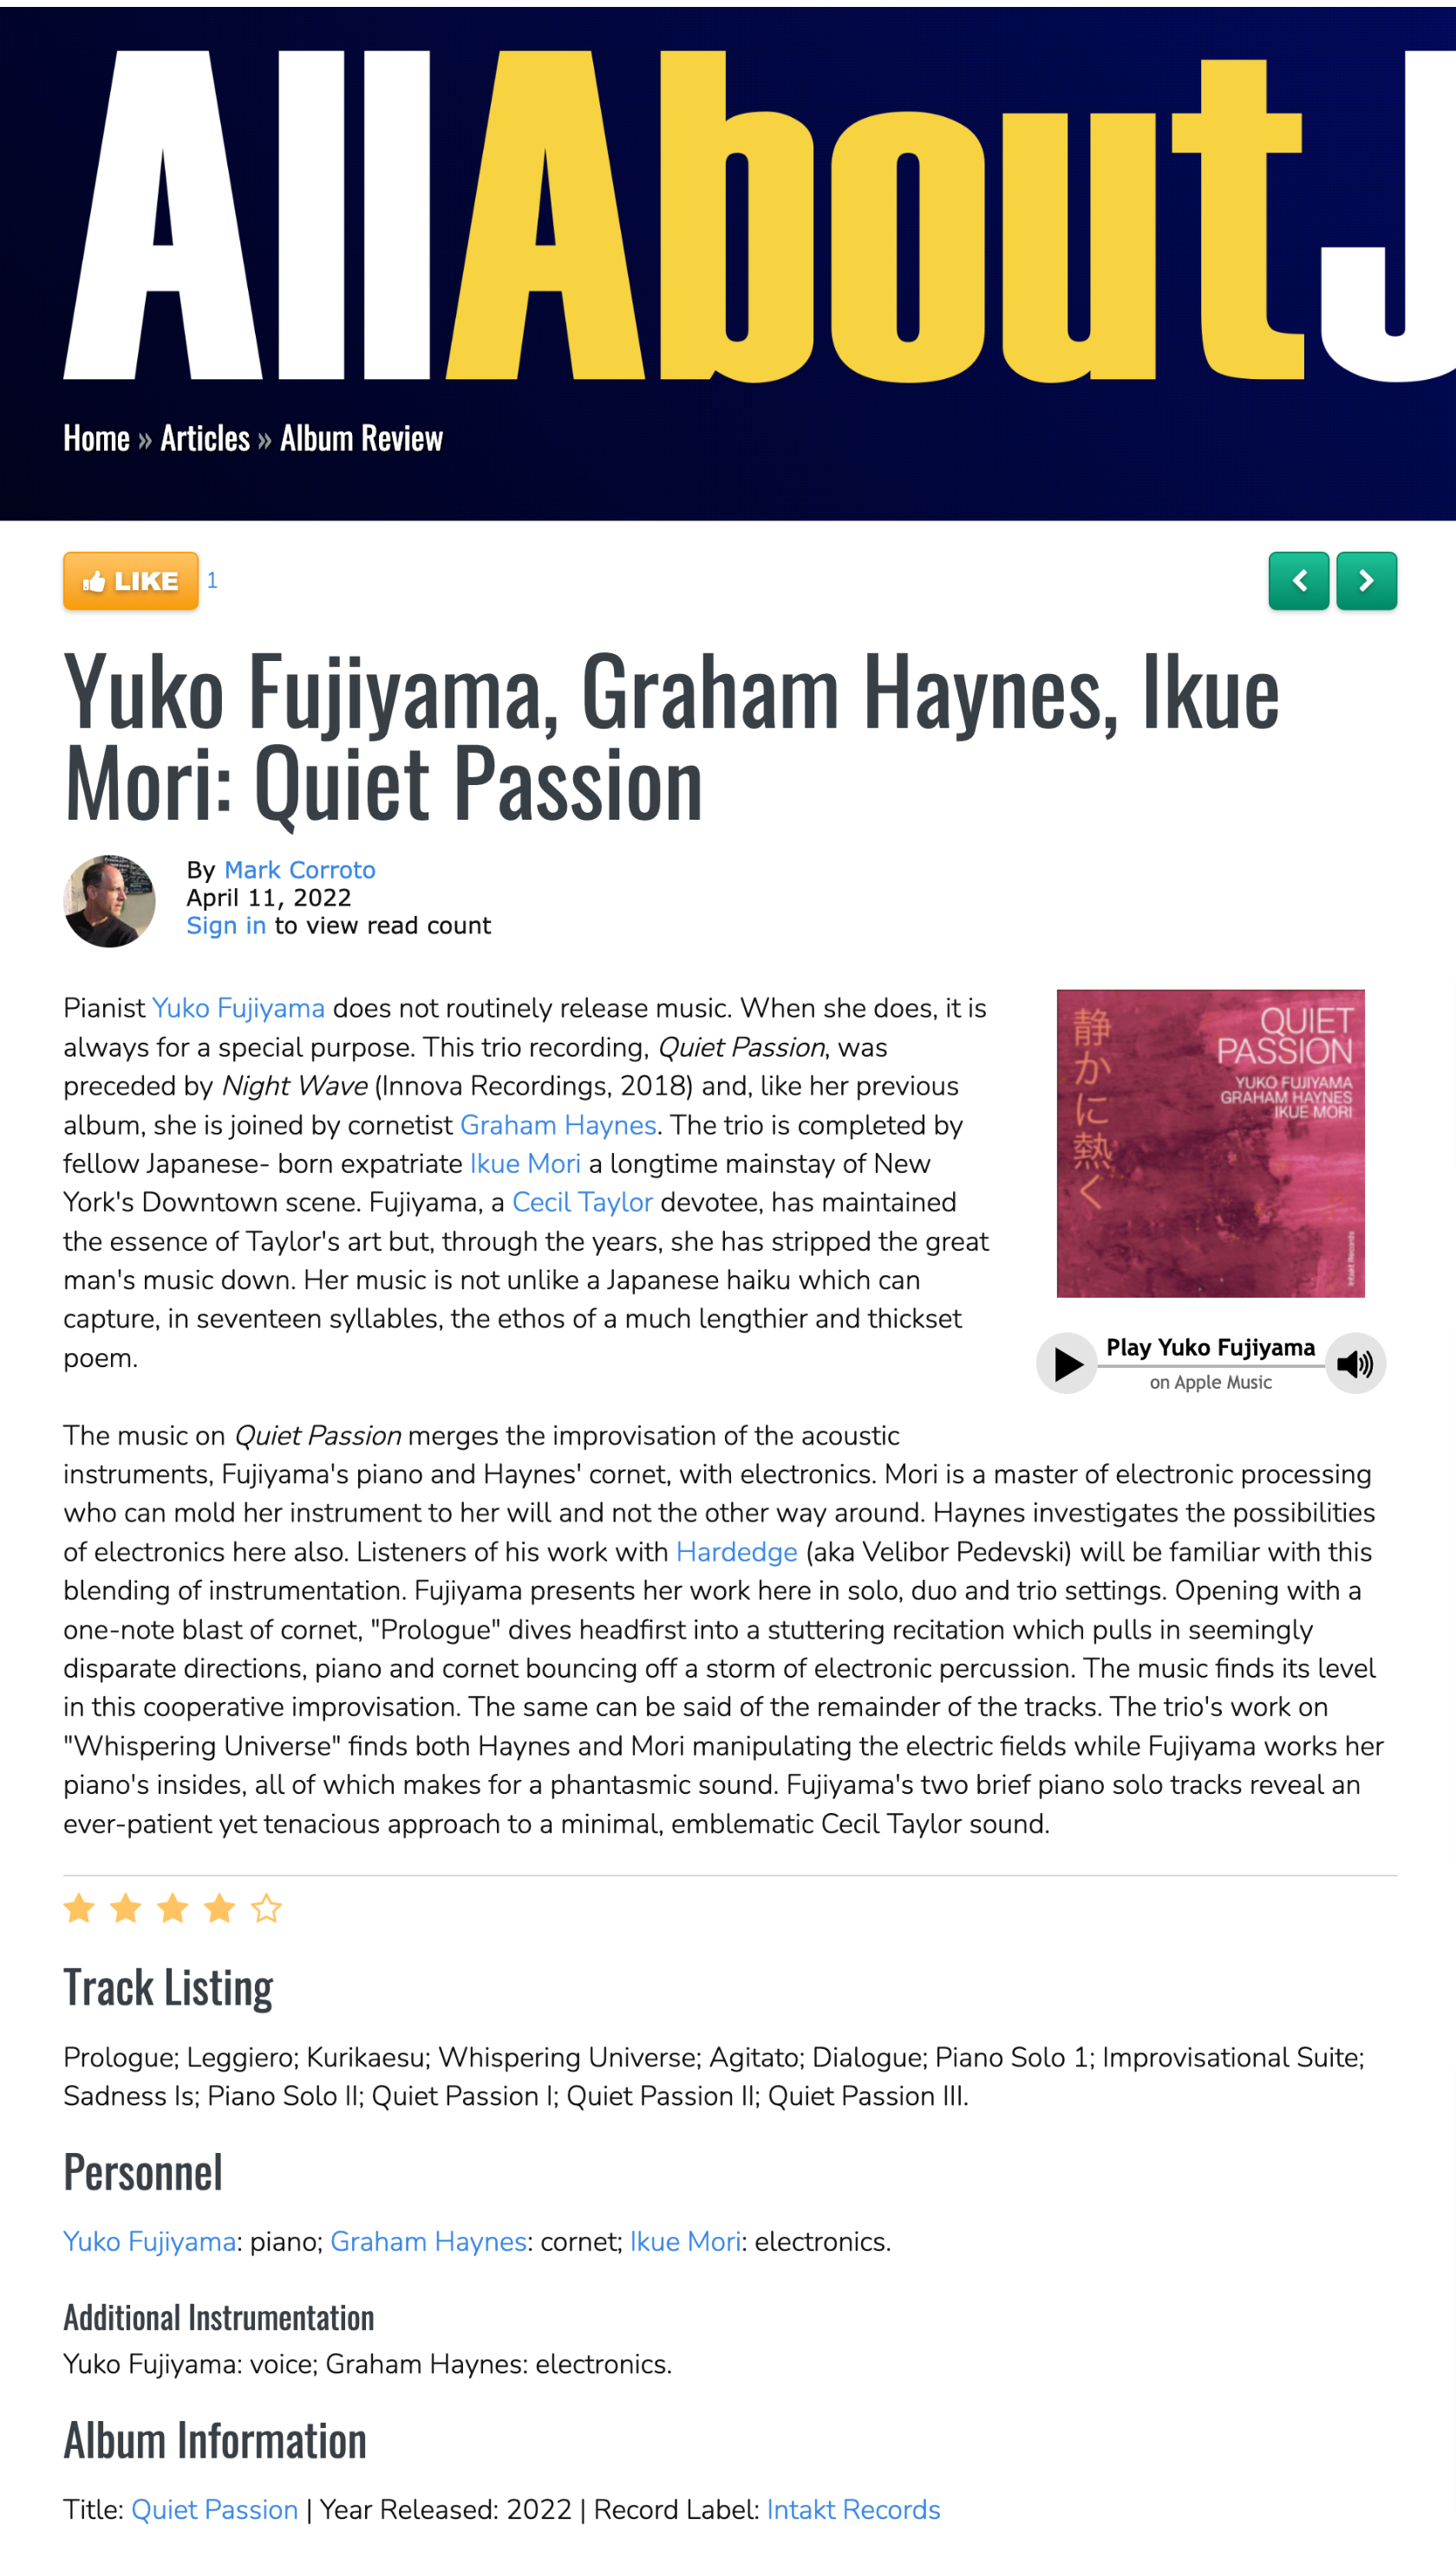 Pianist Yuko Fujiyama does not routinely release music. When she does, it is always for a special purpose. This trio recording, Quiet Passion, was preceded by Night Wave (Innova Recordings, 2018) and, like her previous album, she is joined by cornetist Graham Haynes. The trio is completed by fellow Japanese- born expatriate Ikue Mori a longtime mainstay of New York's Downtown scene. Fujiyama, a Cecil Taylor devotee, has maintained the essence of Taylor's art but, through the years, she has stripped the great man's music down. Her music is not unlike a Japanese haiku which can capture, in seventeen syllables, the ethos of a much lengthier and thickset poem.